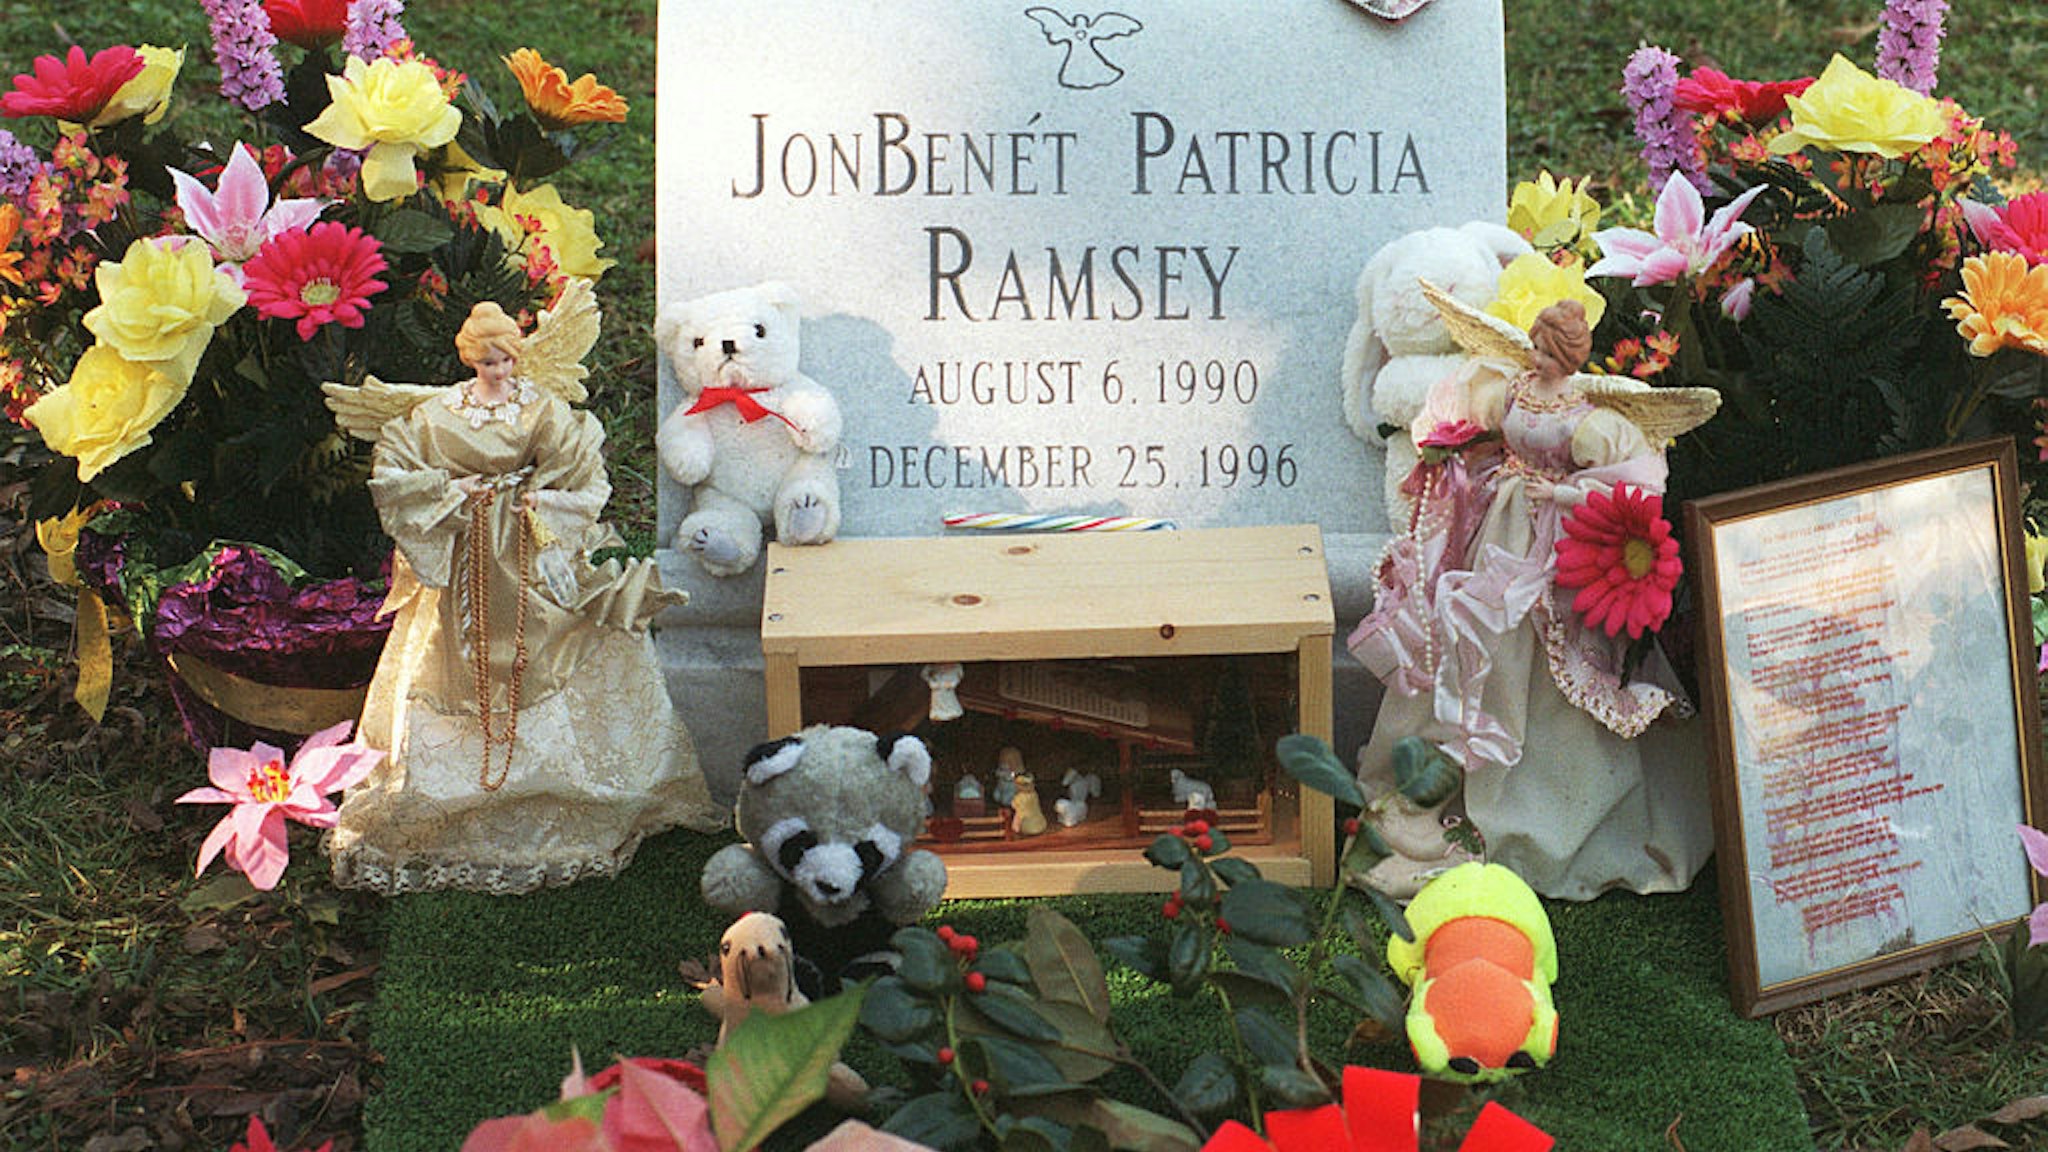 The grave of JonBenet Ramsey, it is still not known who murdered her.